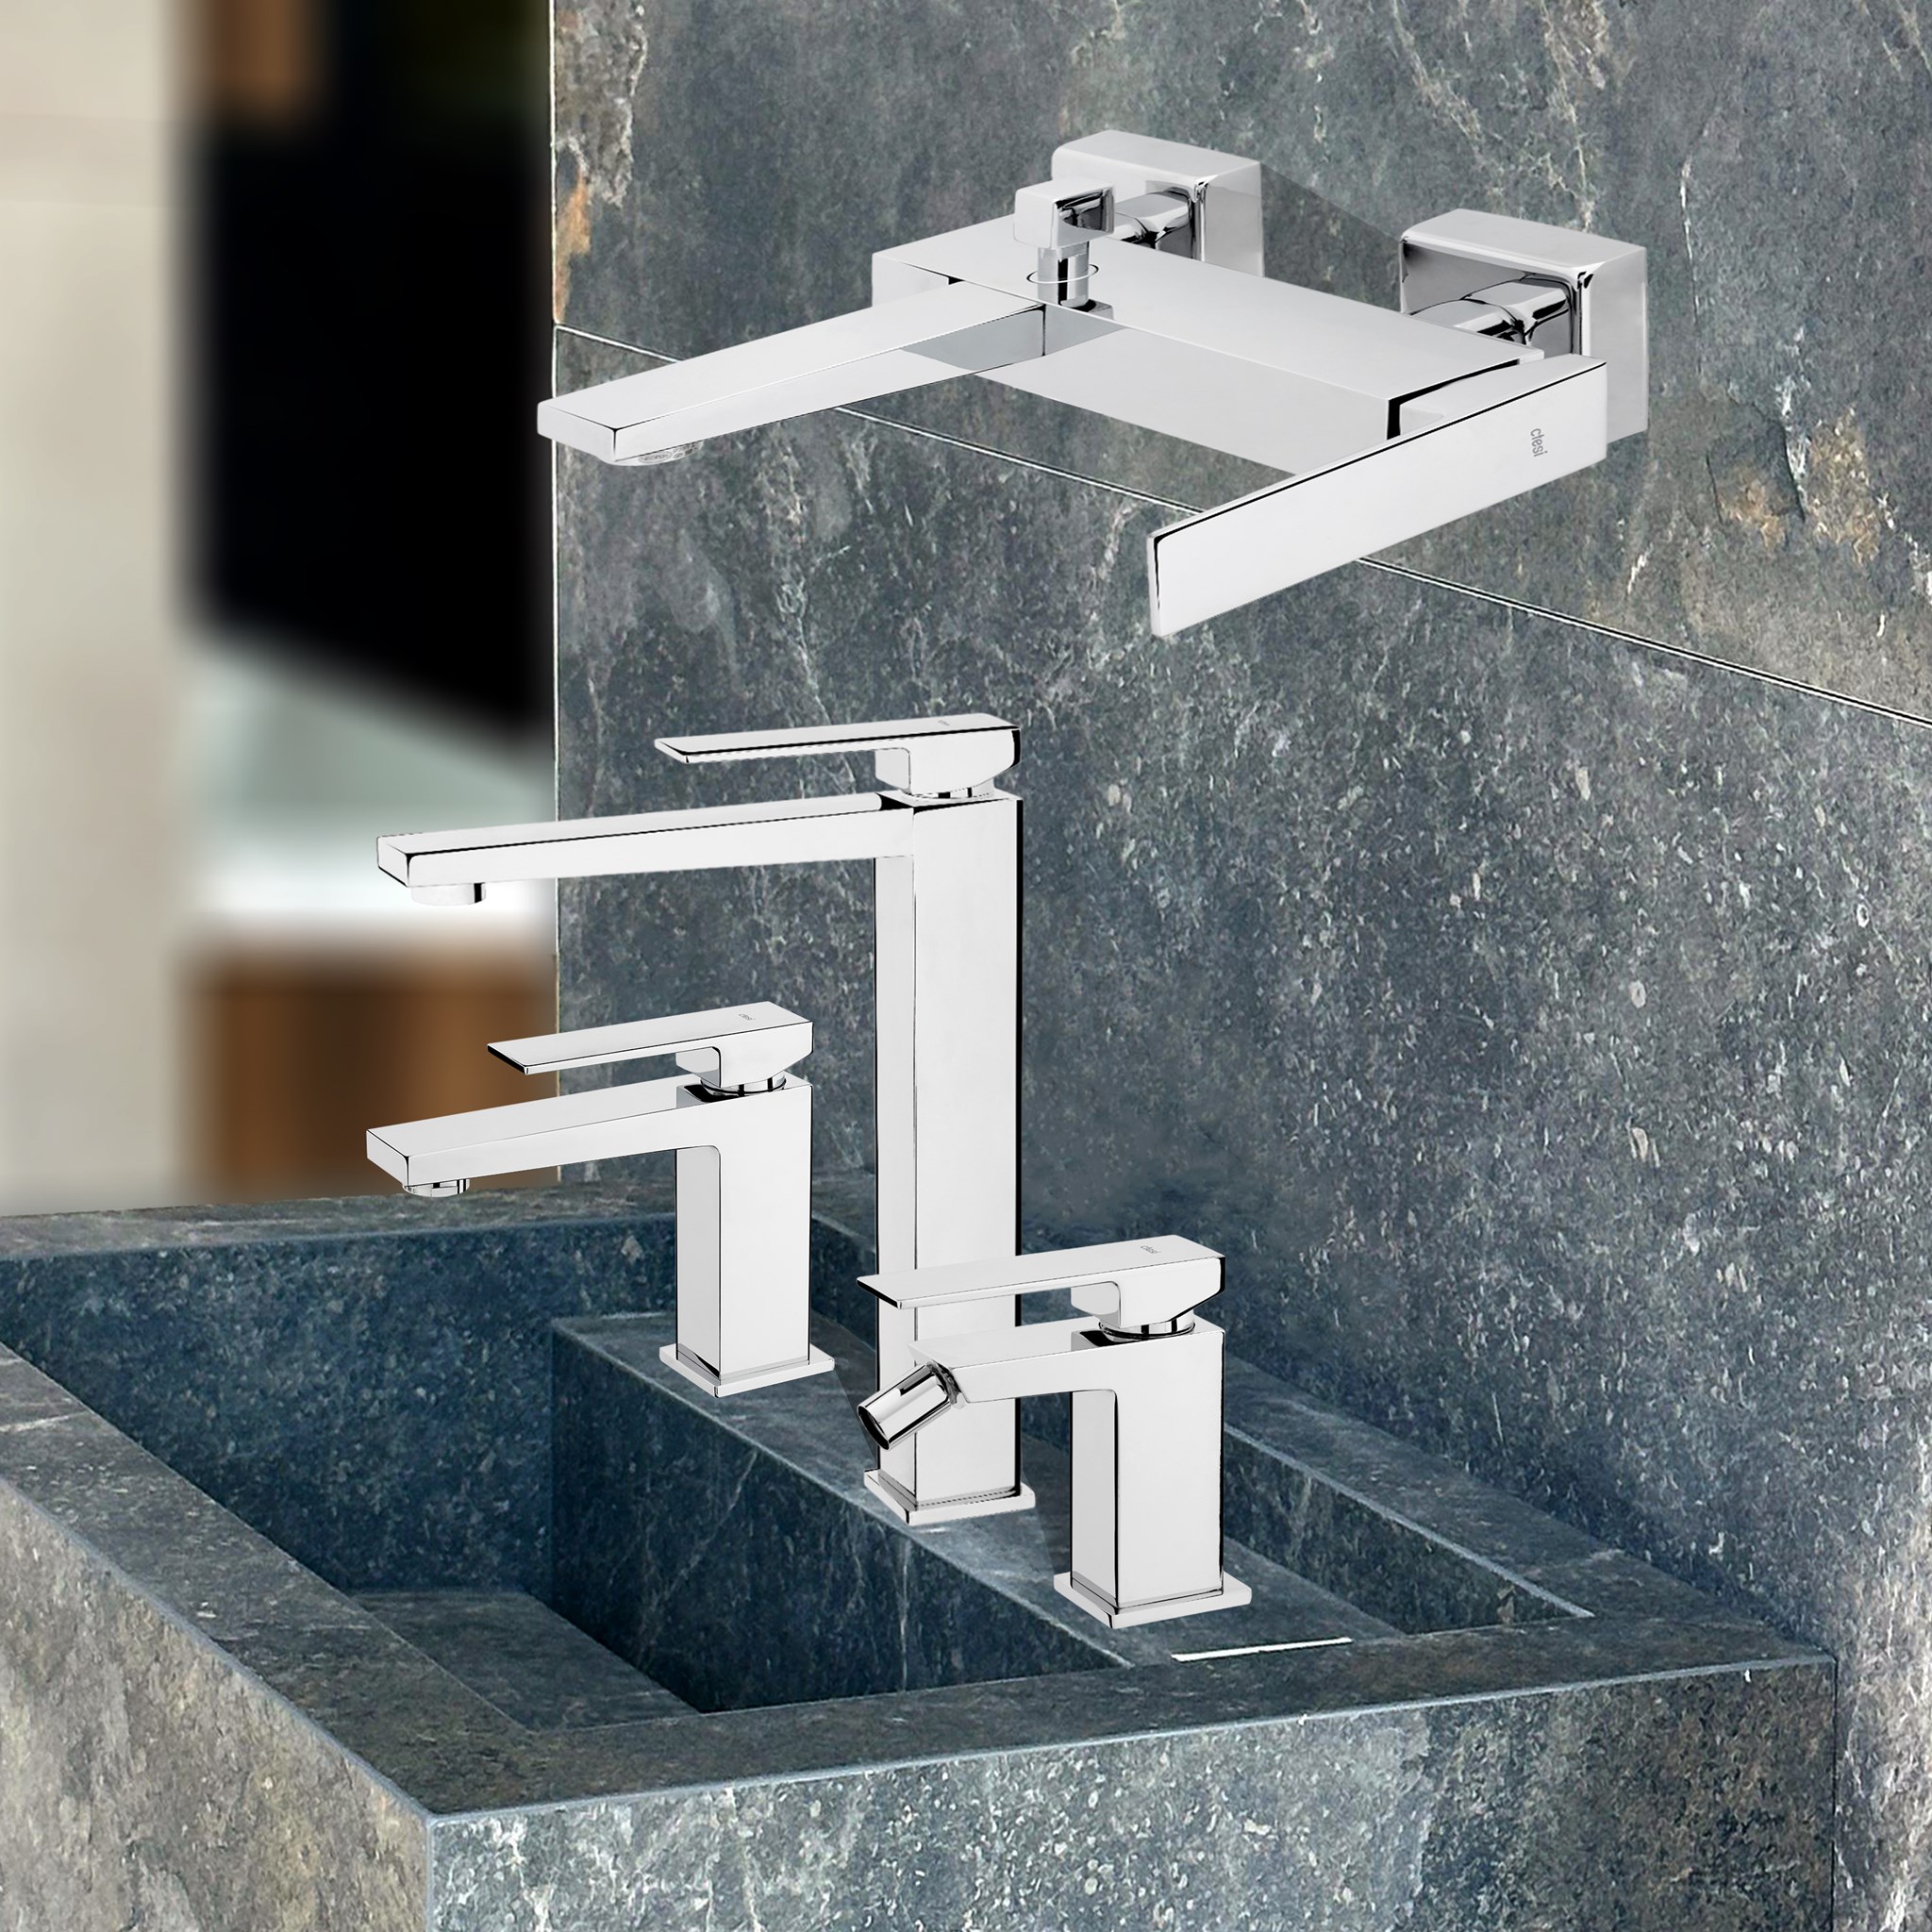 Picture of Ctesi Plane Faucets set